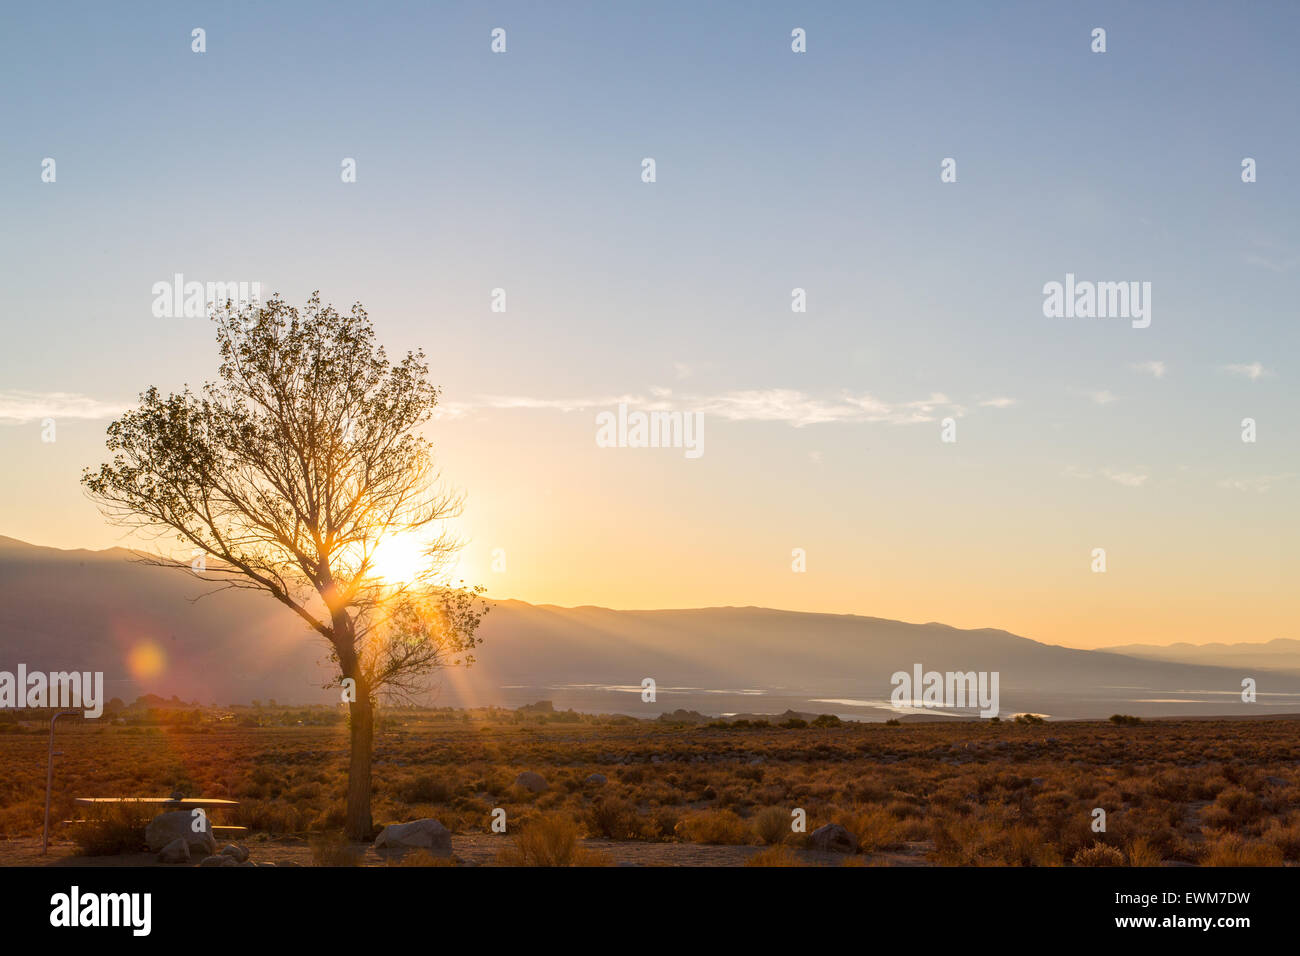 The sun rises over Lone Pine in the Alabama Hills, creating sun rays through a tree. Stock Photo